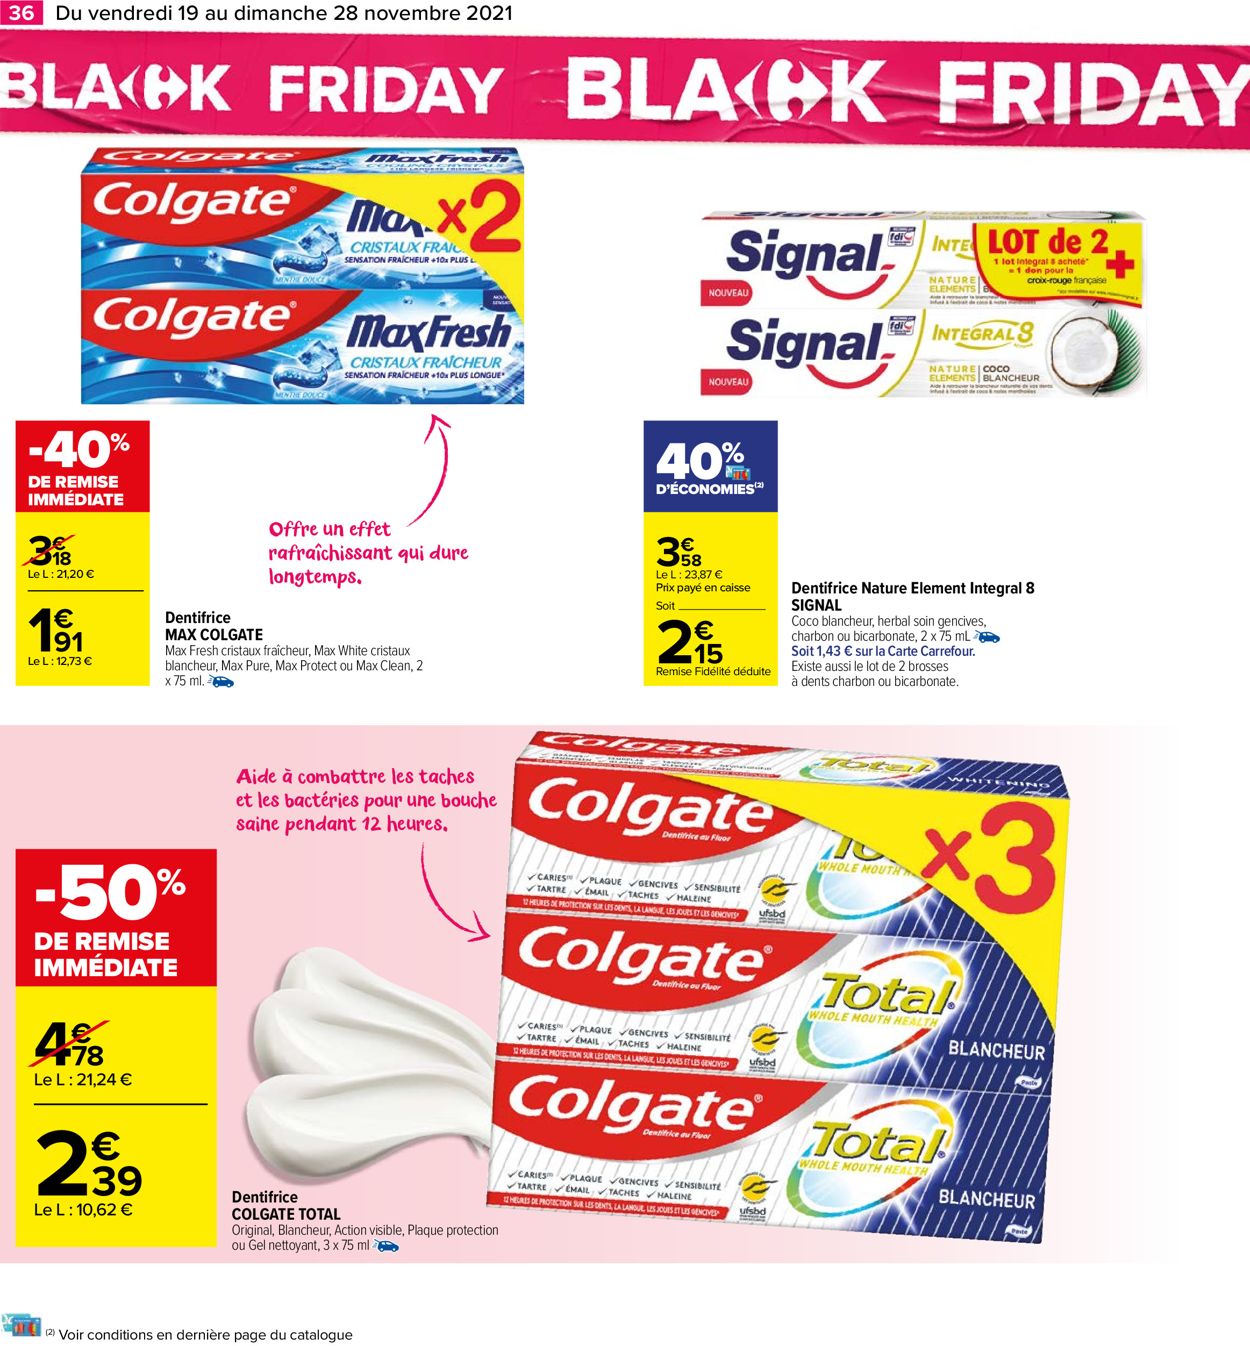 Carrefour BLACK WEEK 2021 Catalogue - 19.11-28.11.2021 (Page 36)